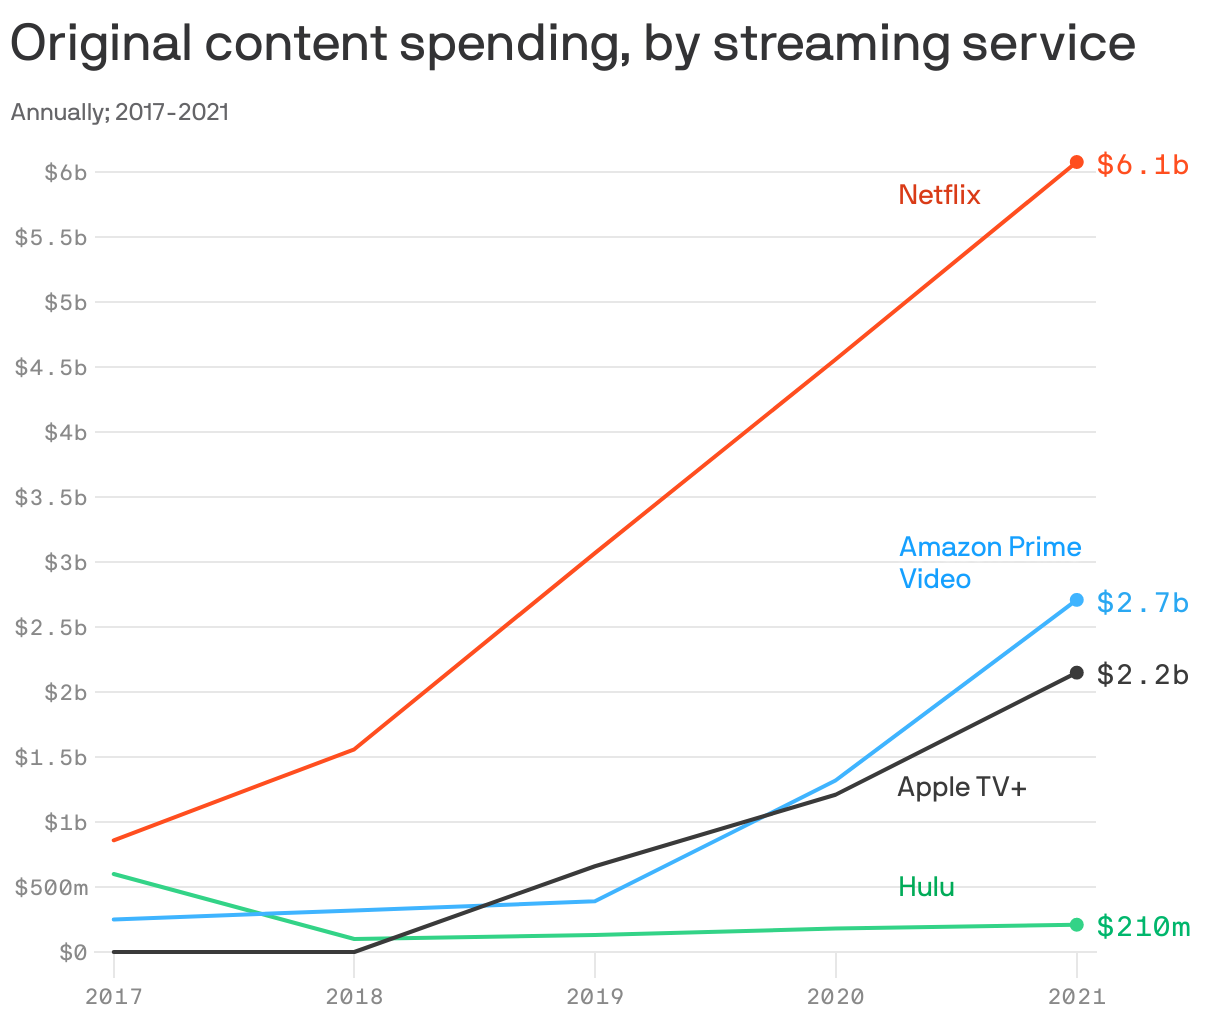 Original content spending, by streaming service